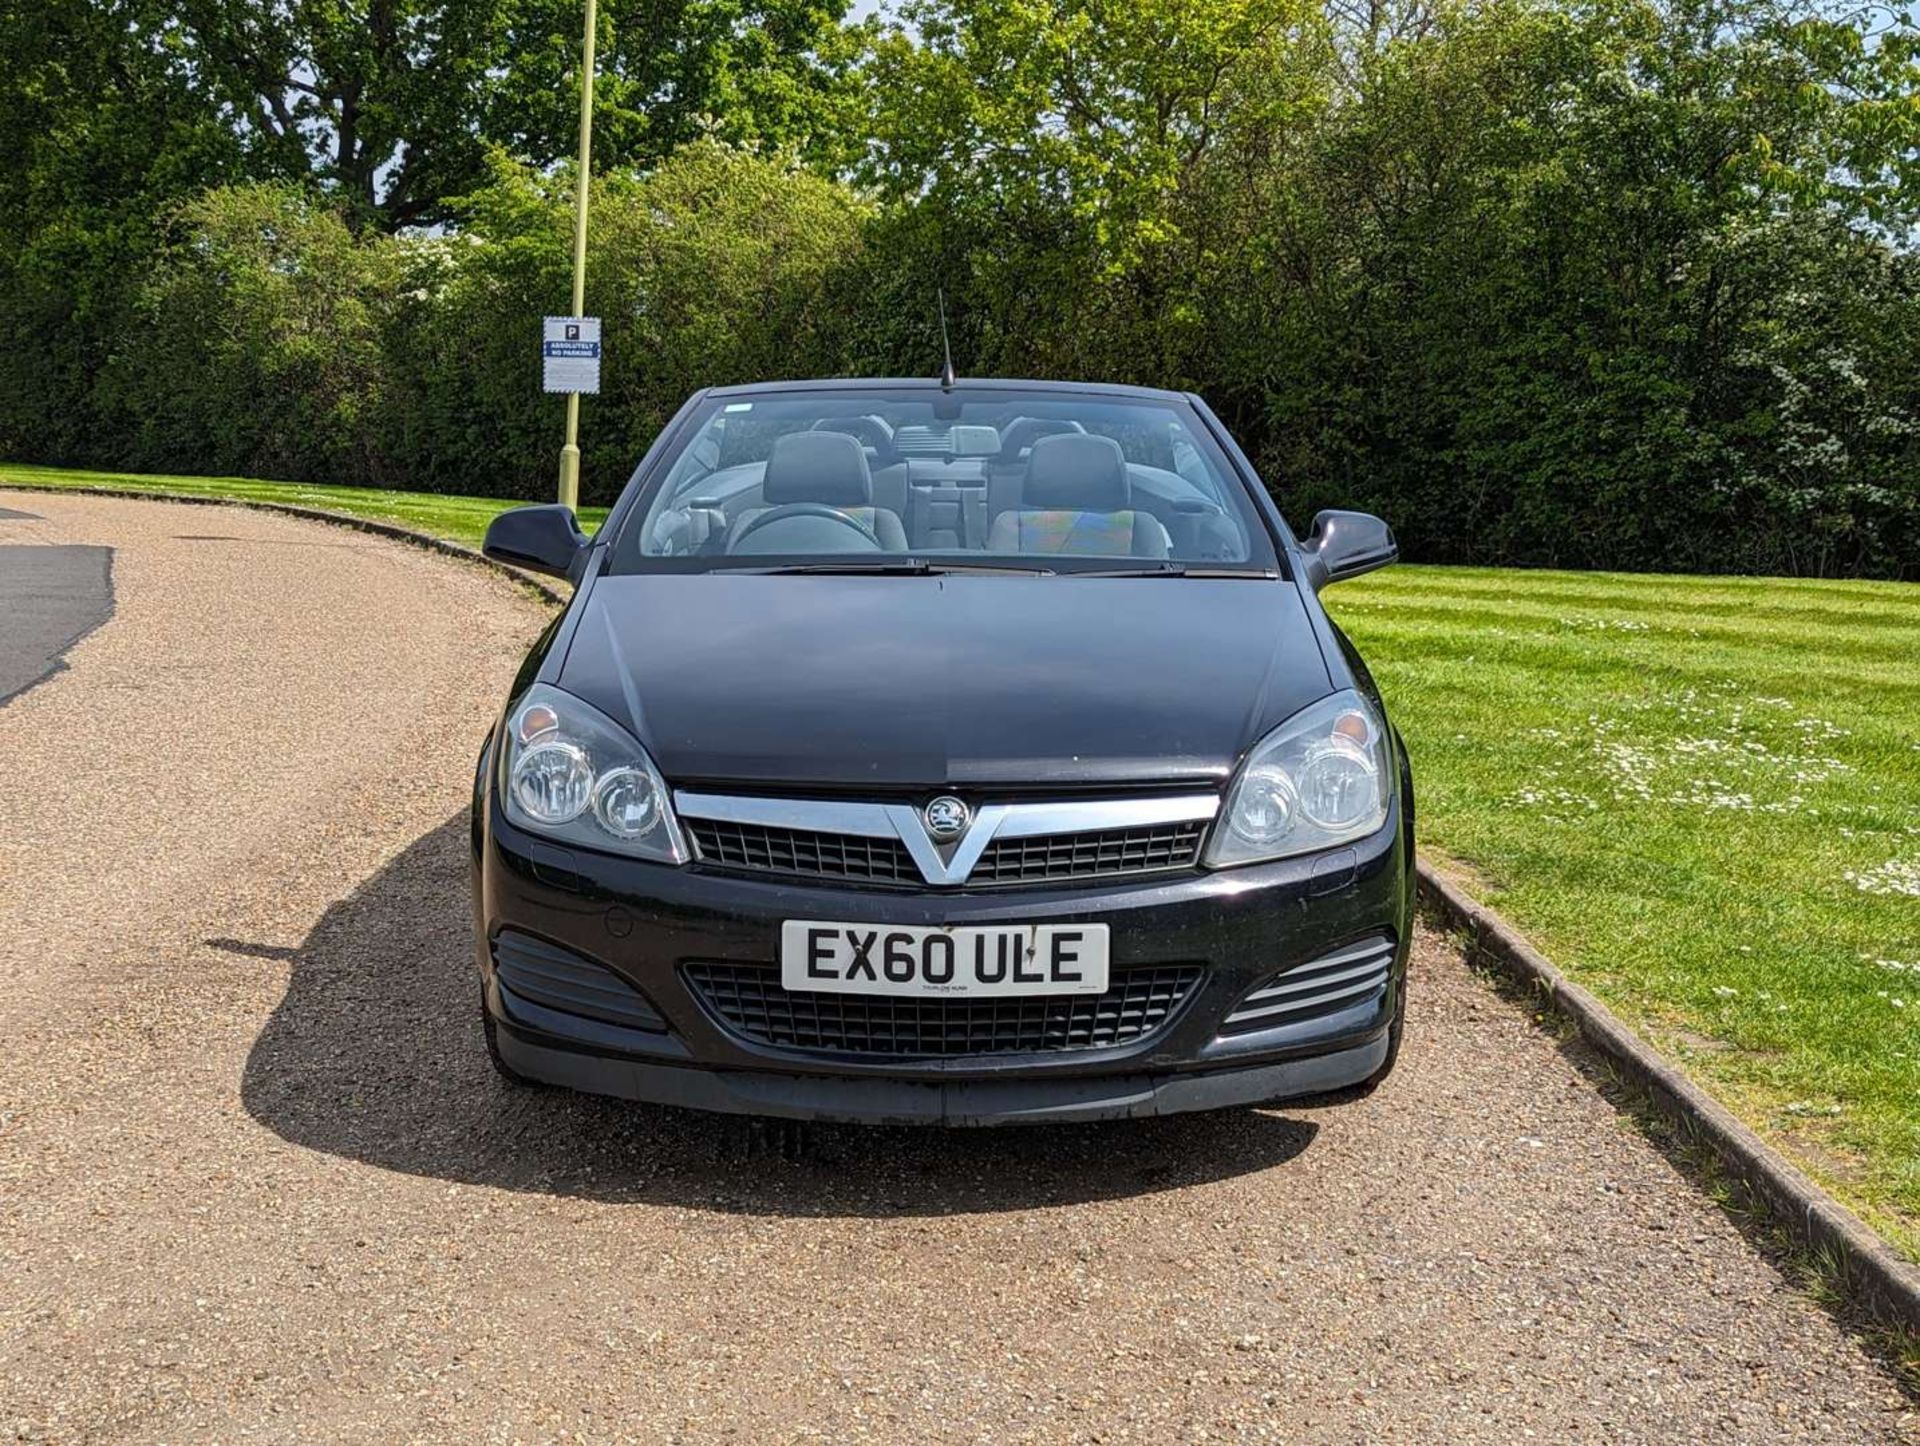 2010 VAUXHALL ASTRA TWINTOP AIR - Image 4 of 30